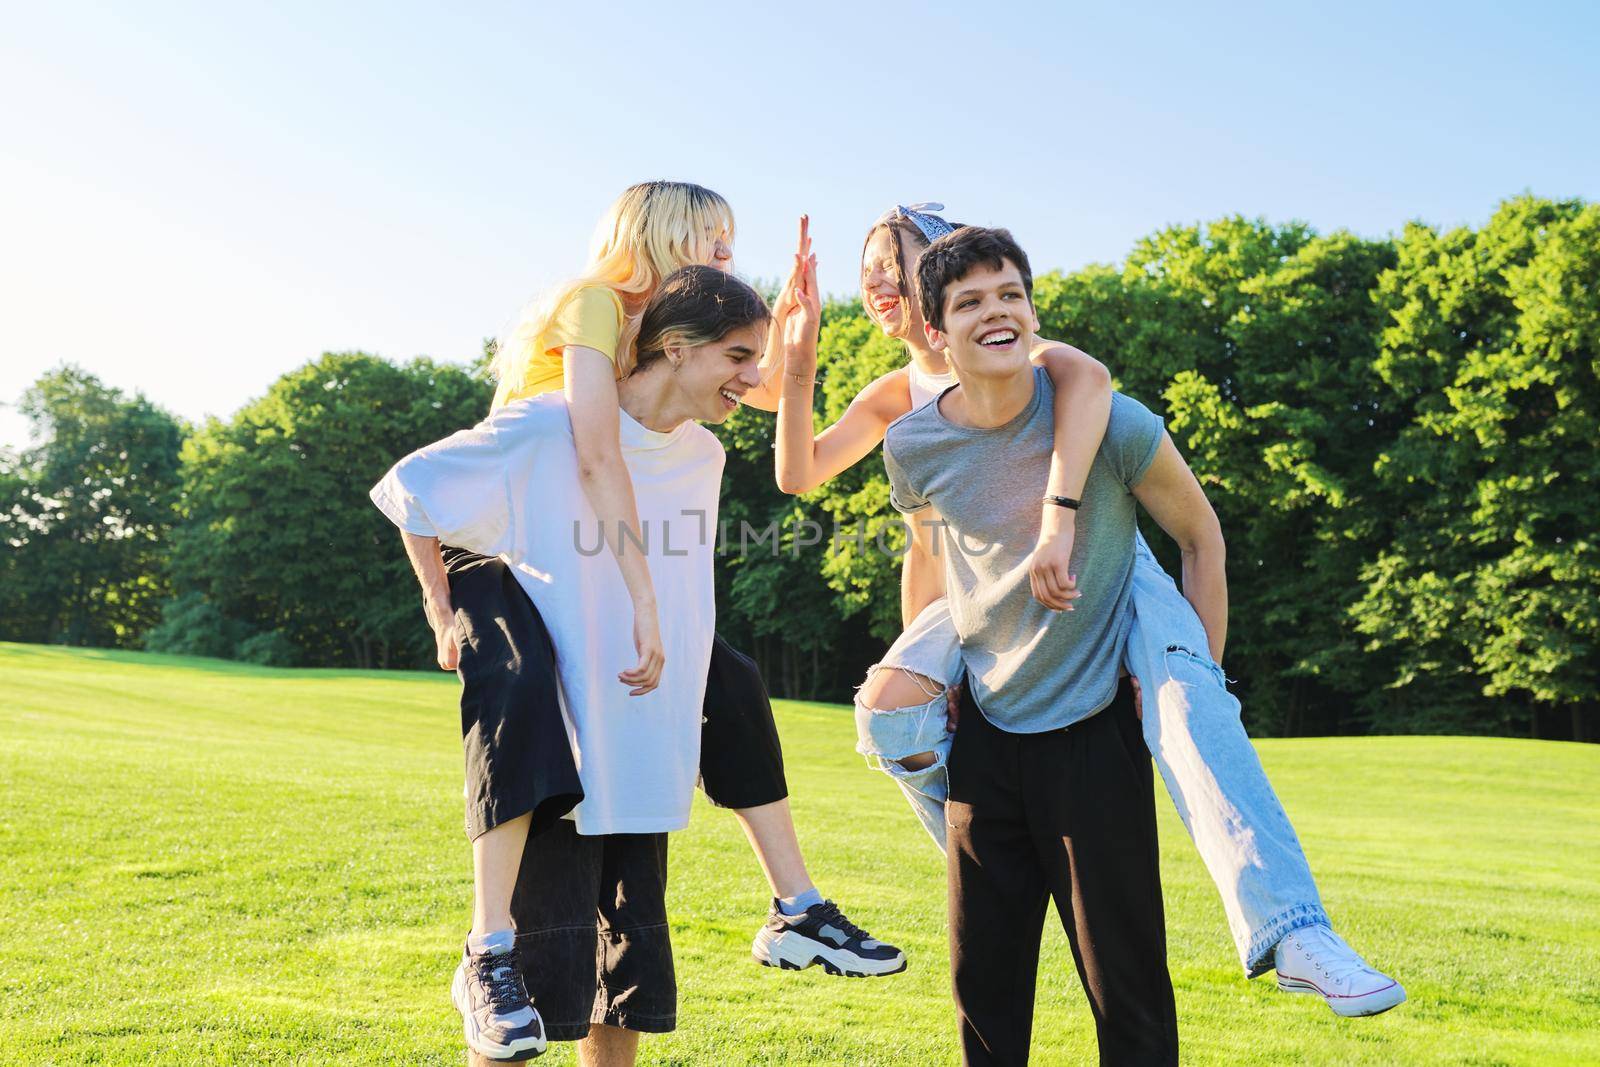 Teenage youth having fun in the park, happy laughing friends. Group of teenagers together on sunny day. Friendship, adolescence, summer, vacation, lifestyle, fun, happiness, holiday, leisure, people